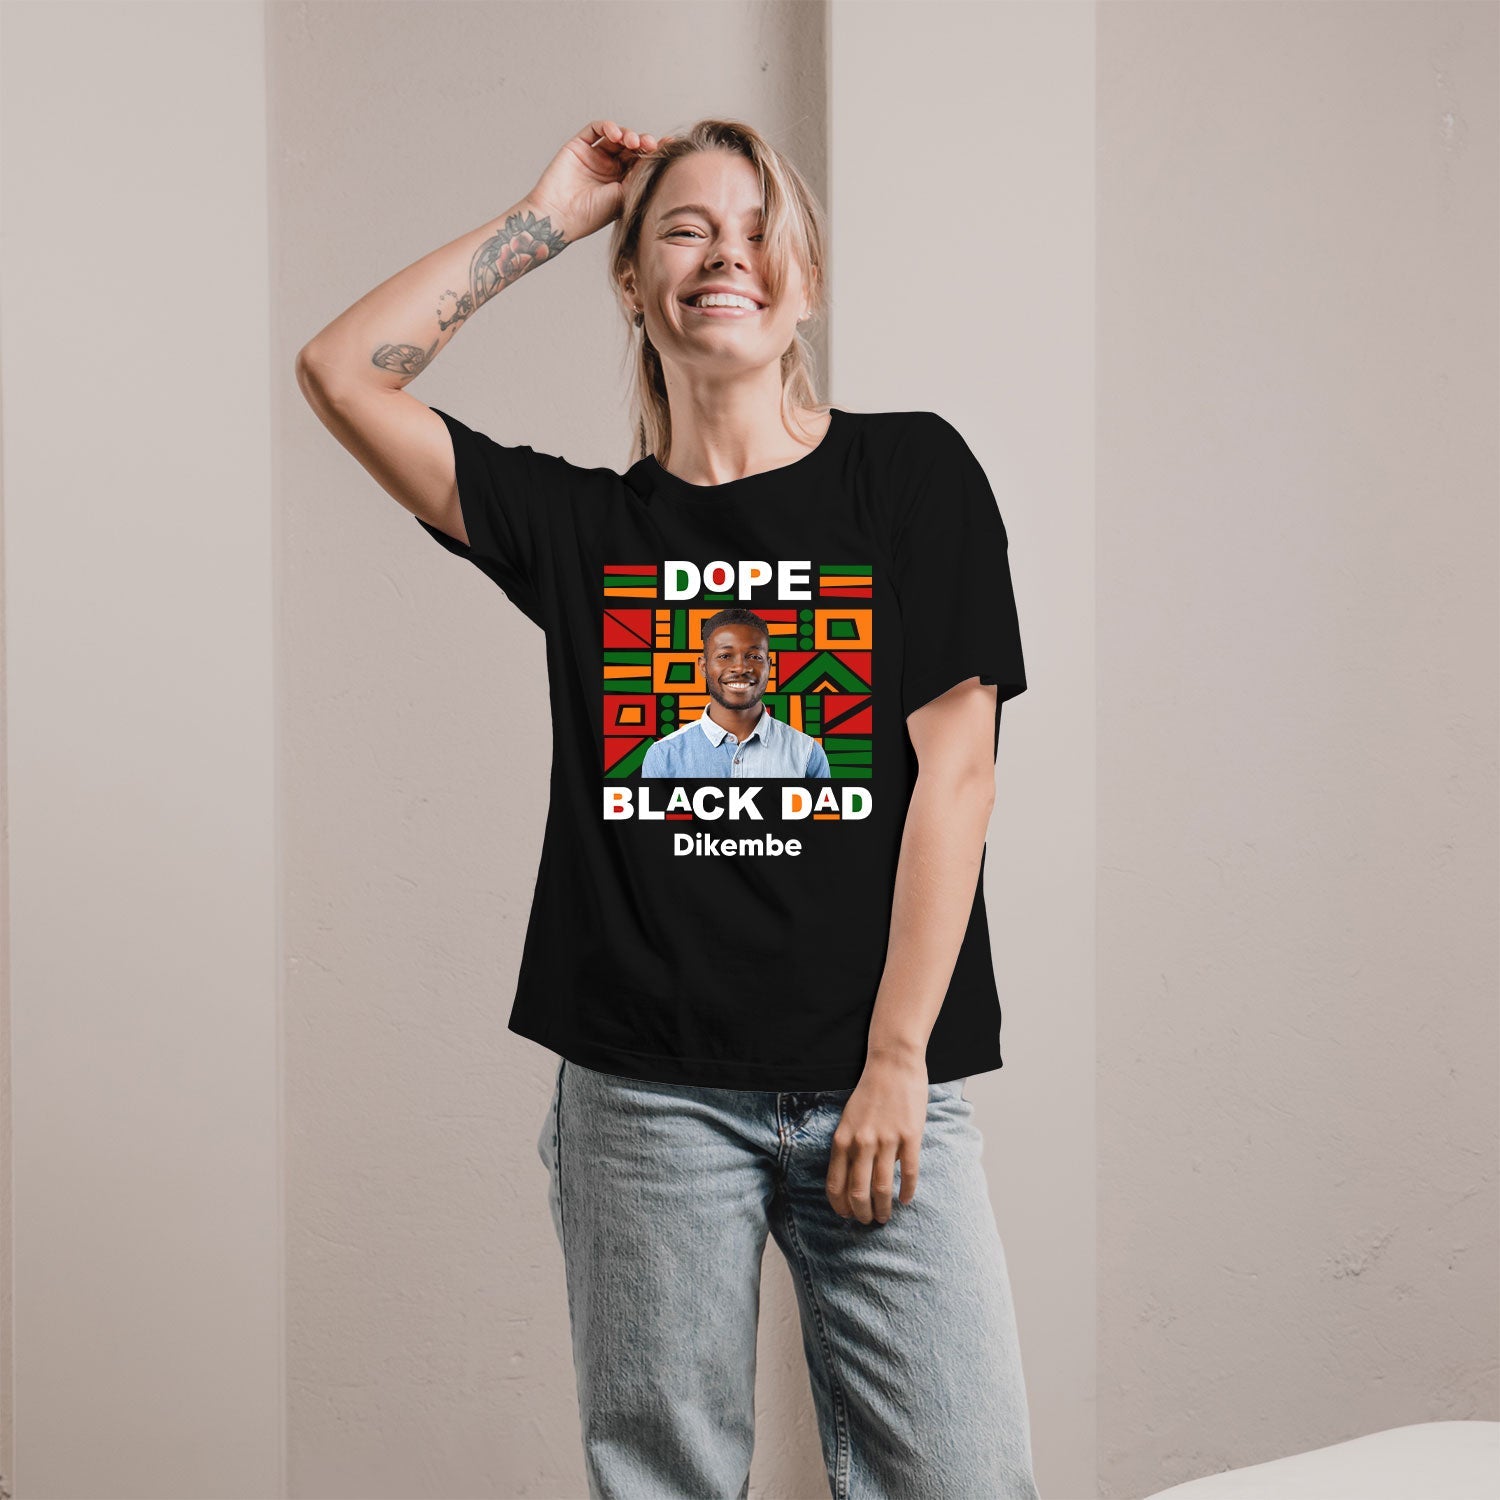 Dope Black Dad - Personalized  gift For Black Dad - Custom Tshirt - MyMindfulGifts